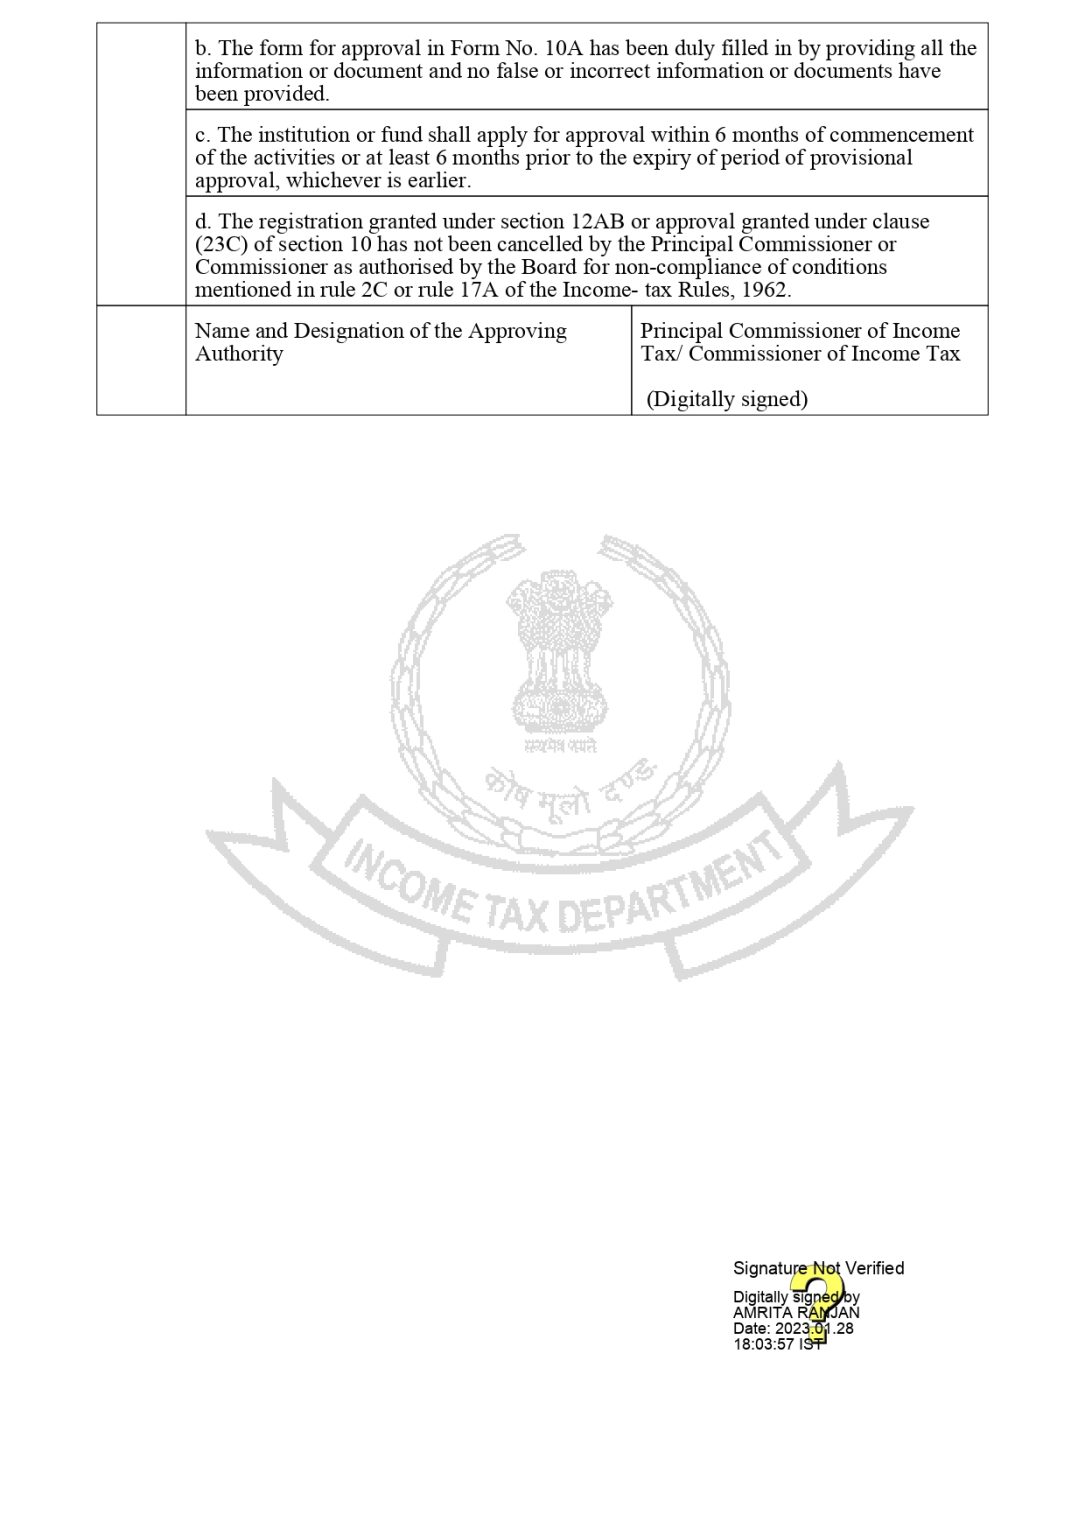 income-tax-rebate-under-section-80-g-issued-by-income-tax-department